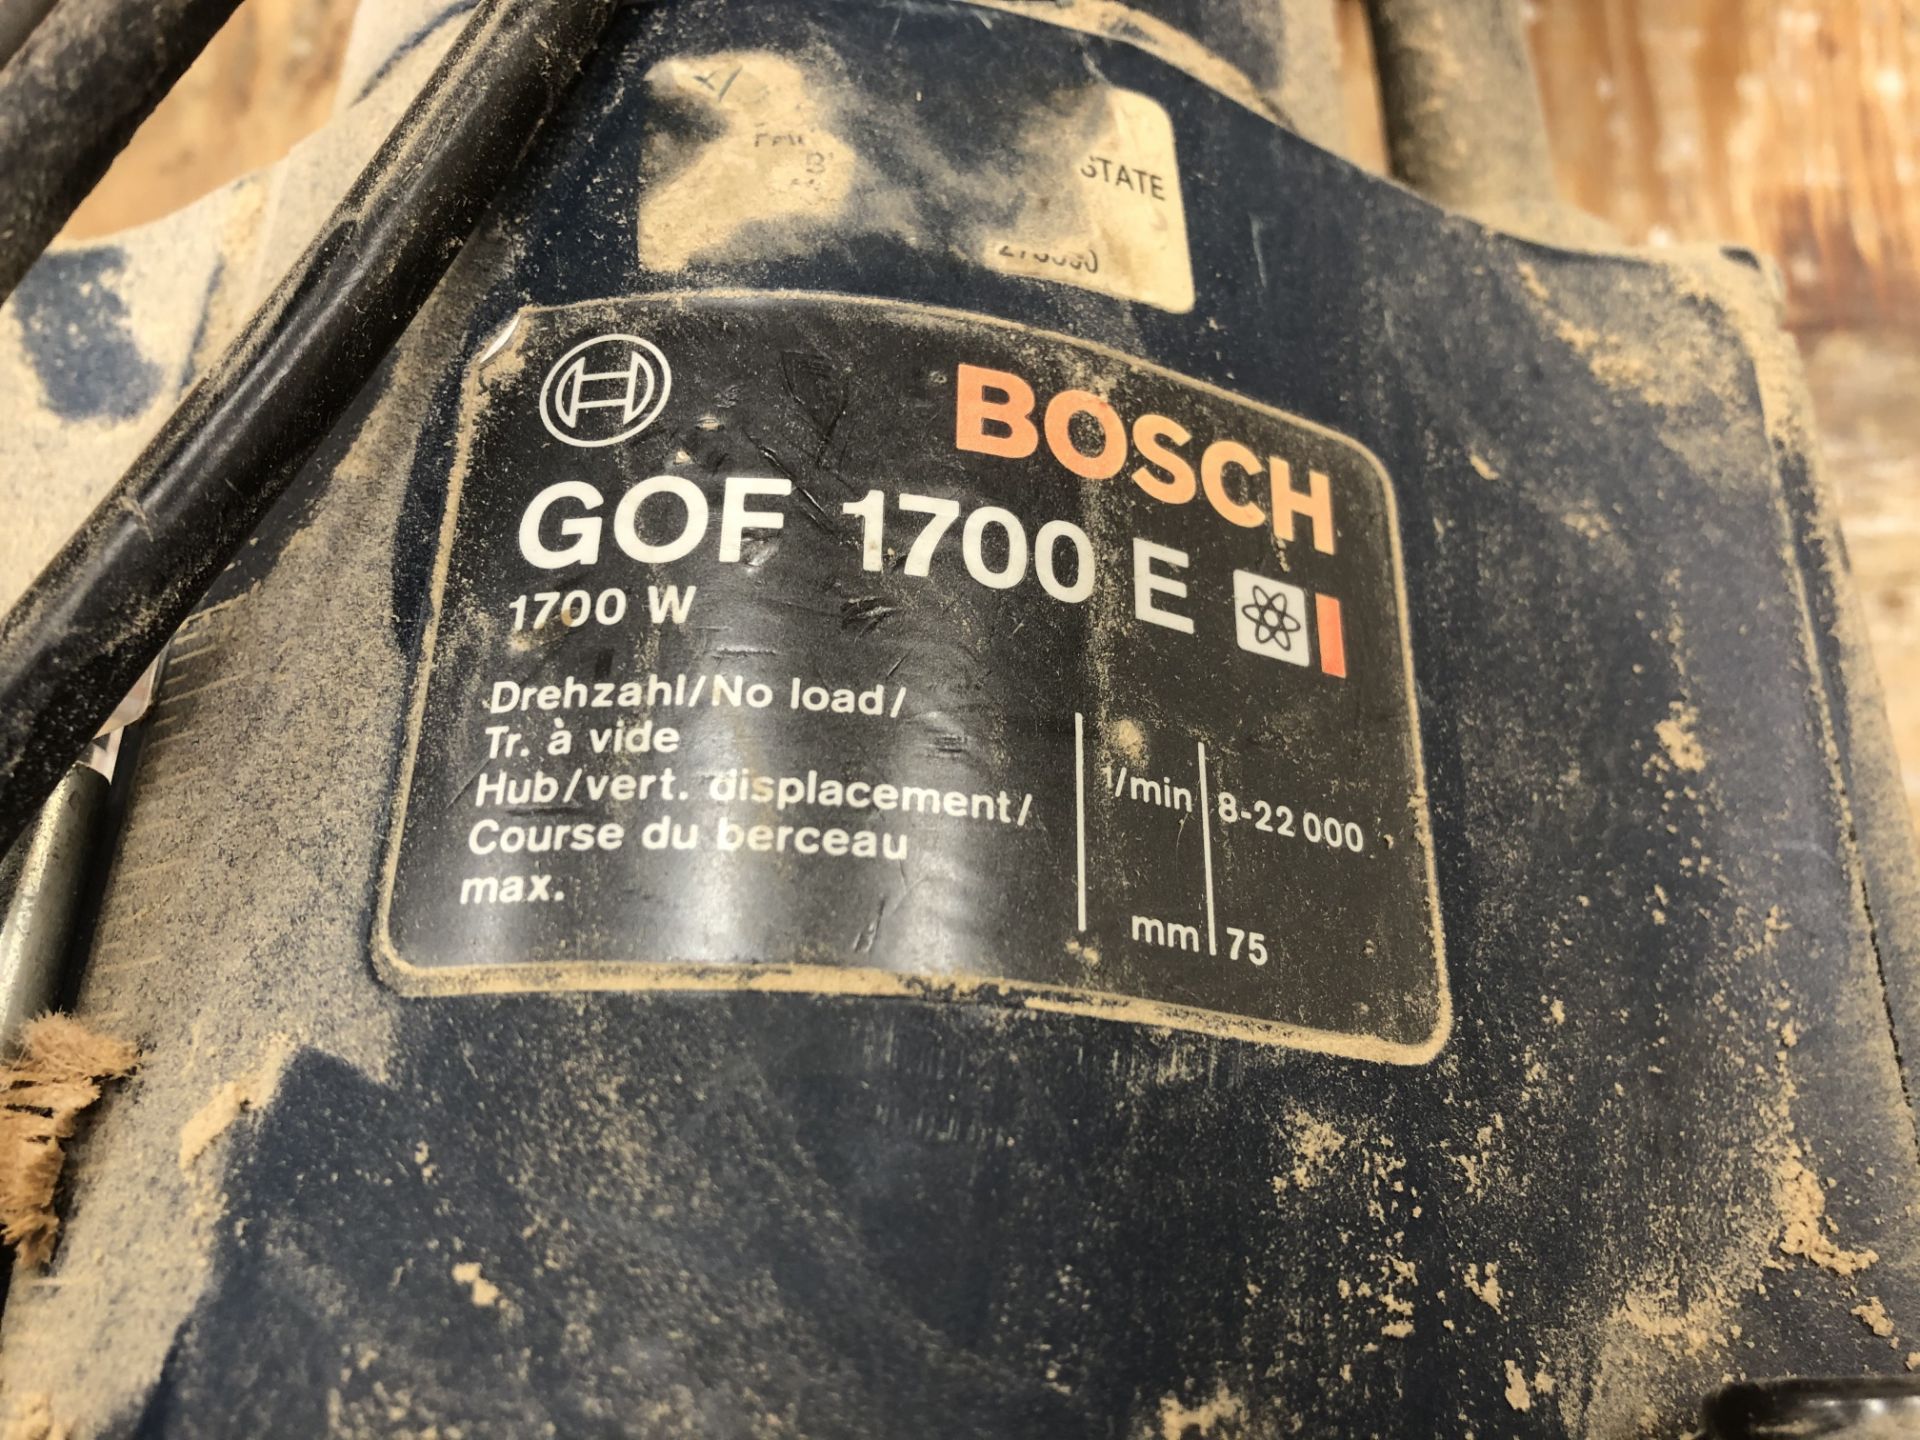 Bosch GOF 1700E Router - Image 3 of 3